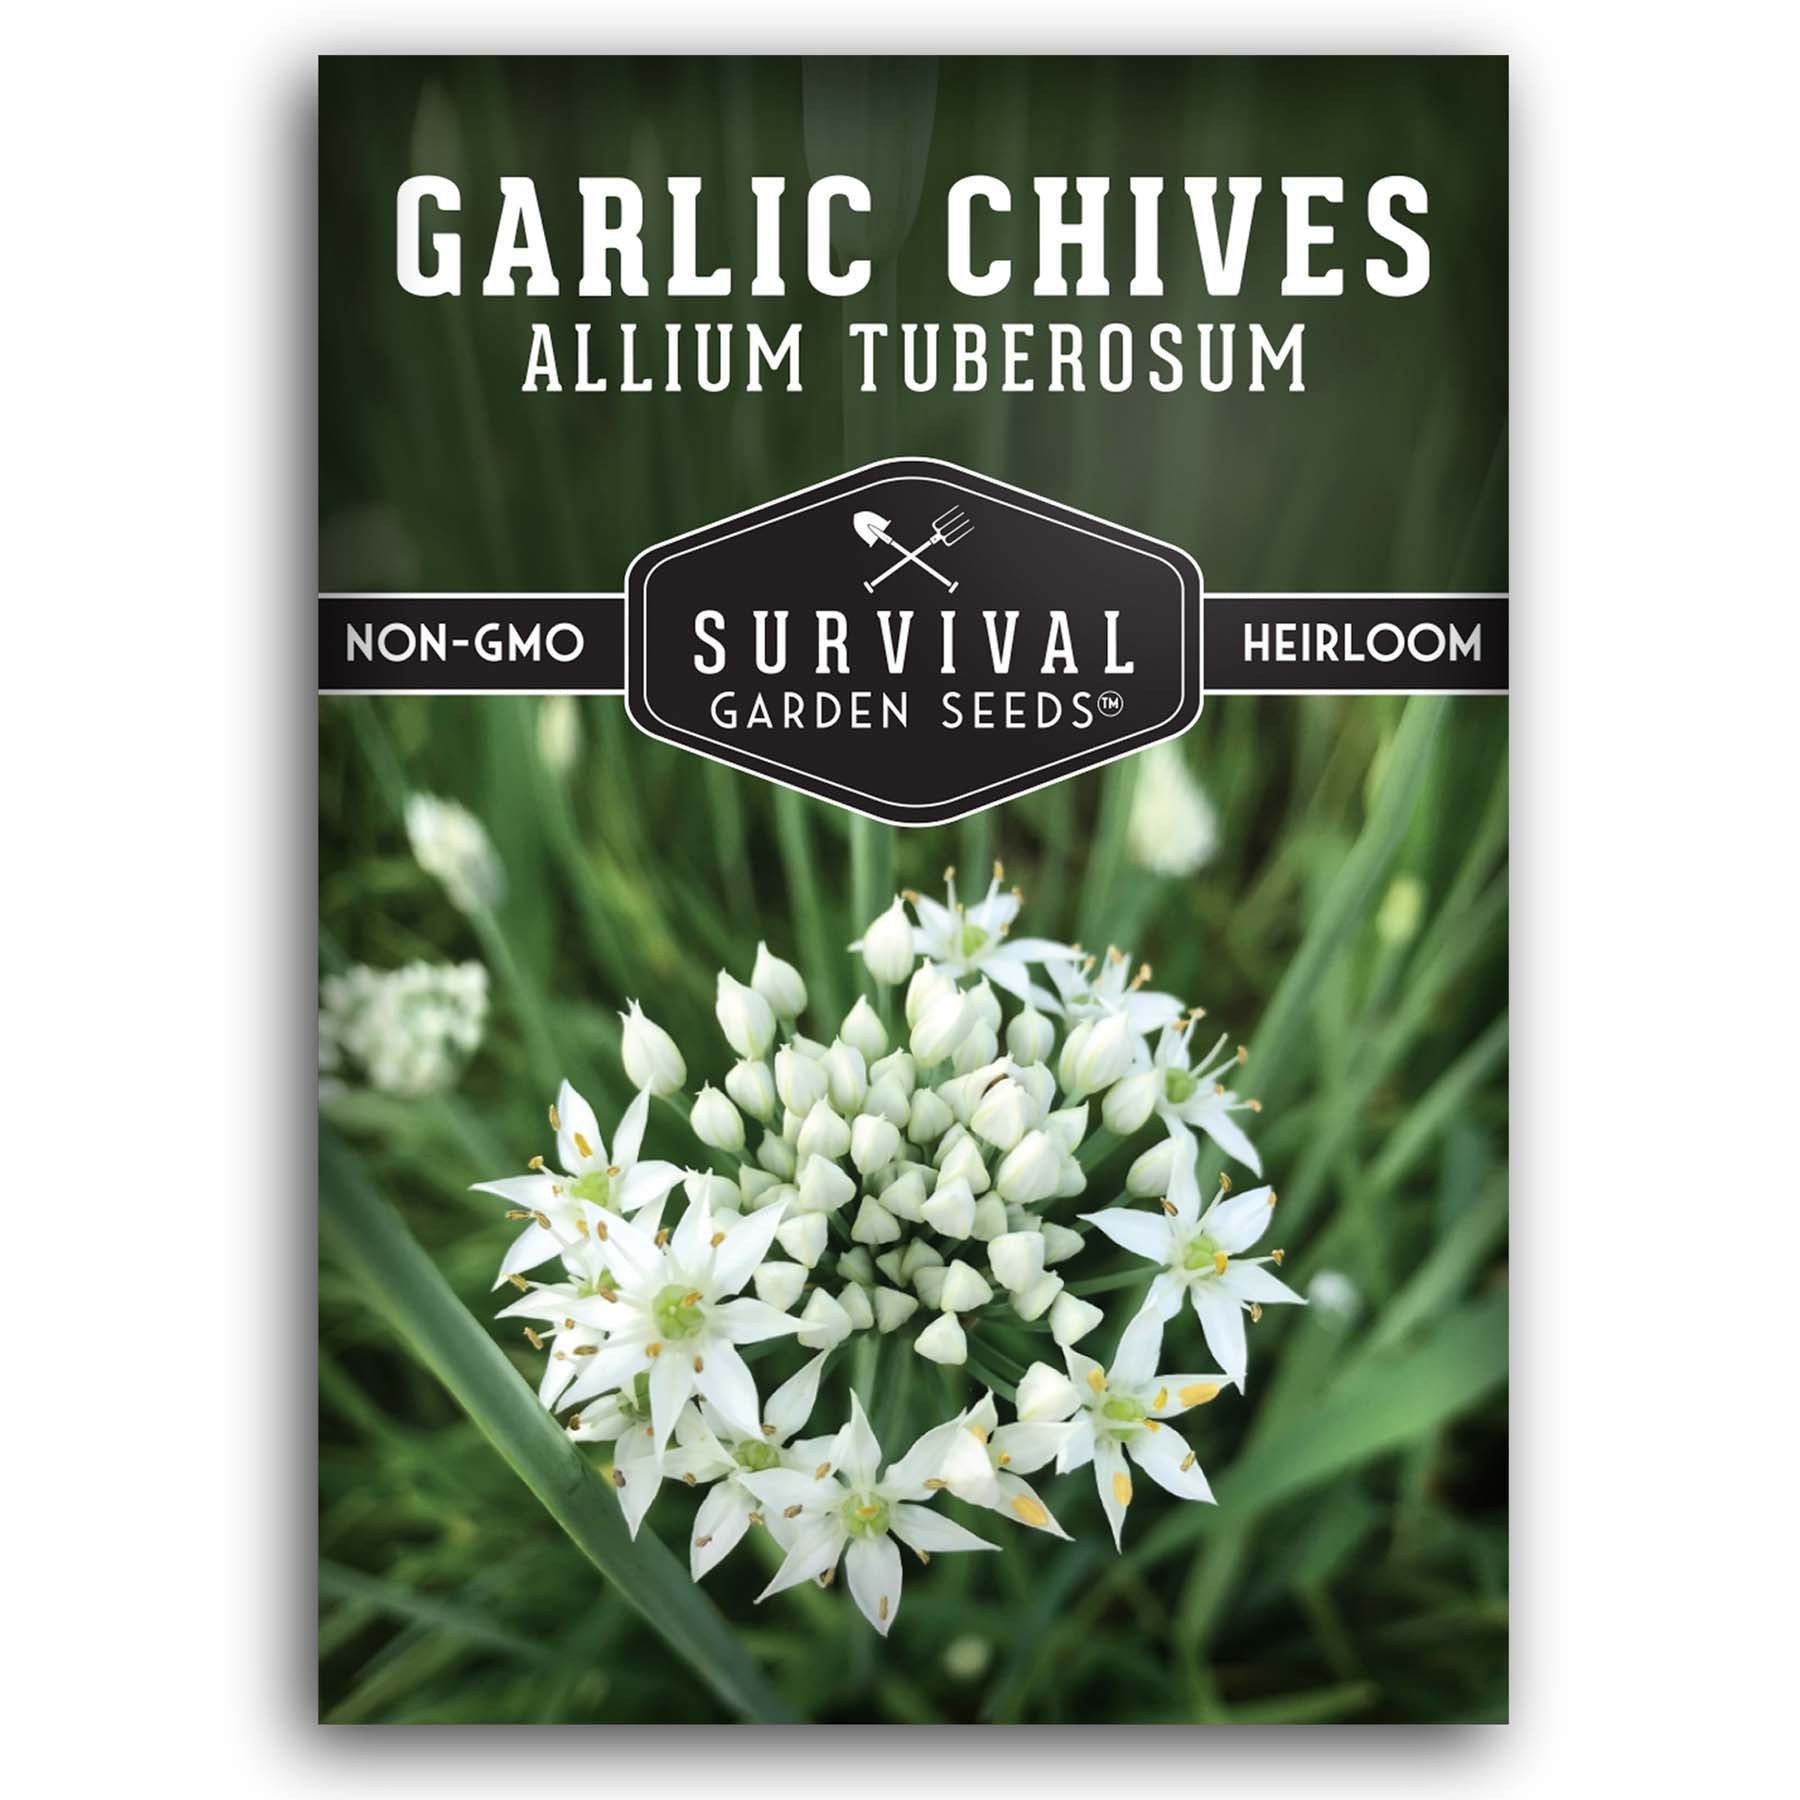 Garlic Chives seeds for planting